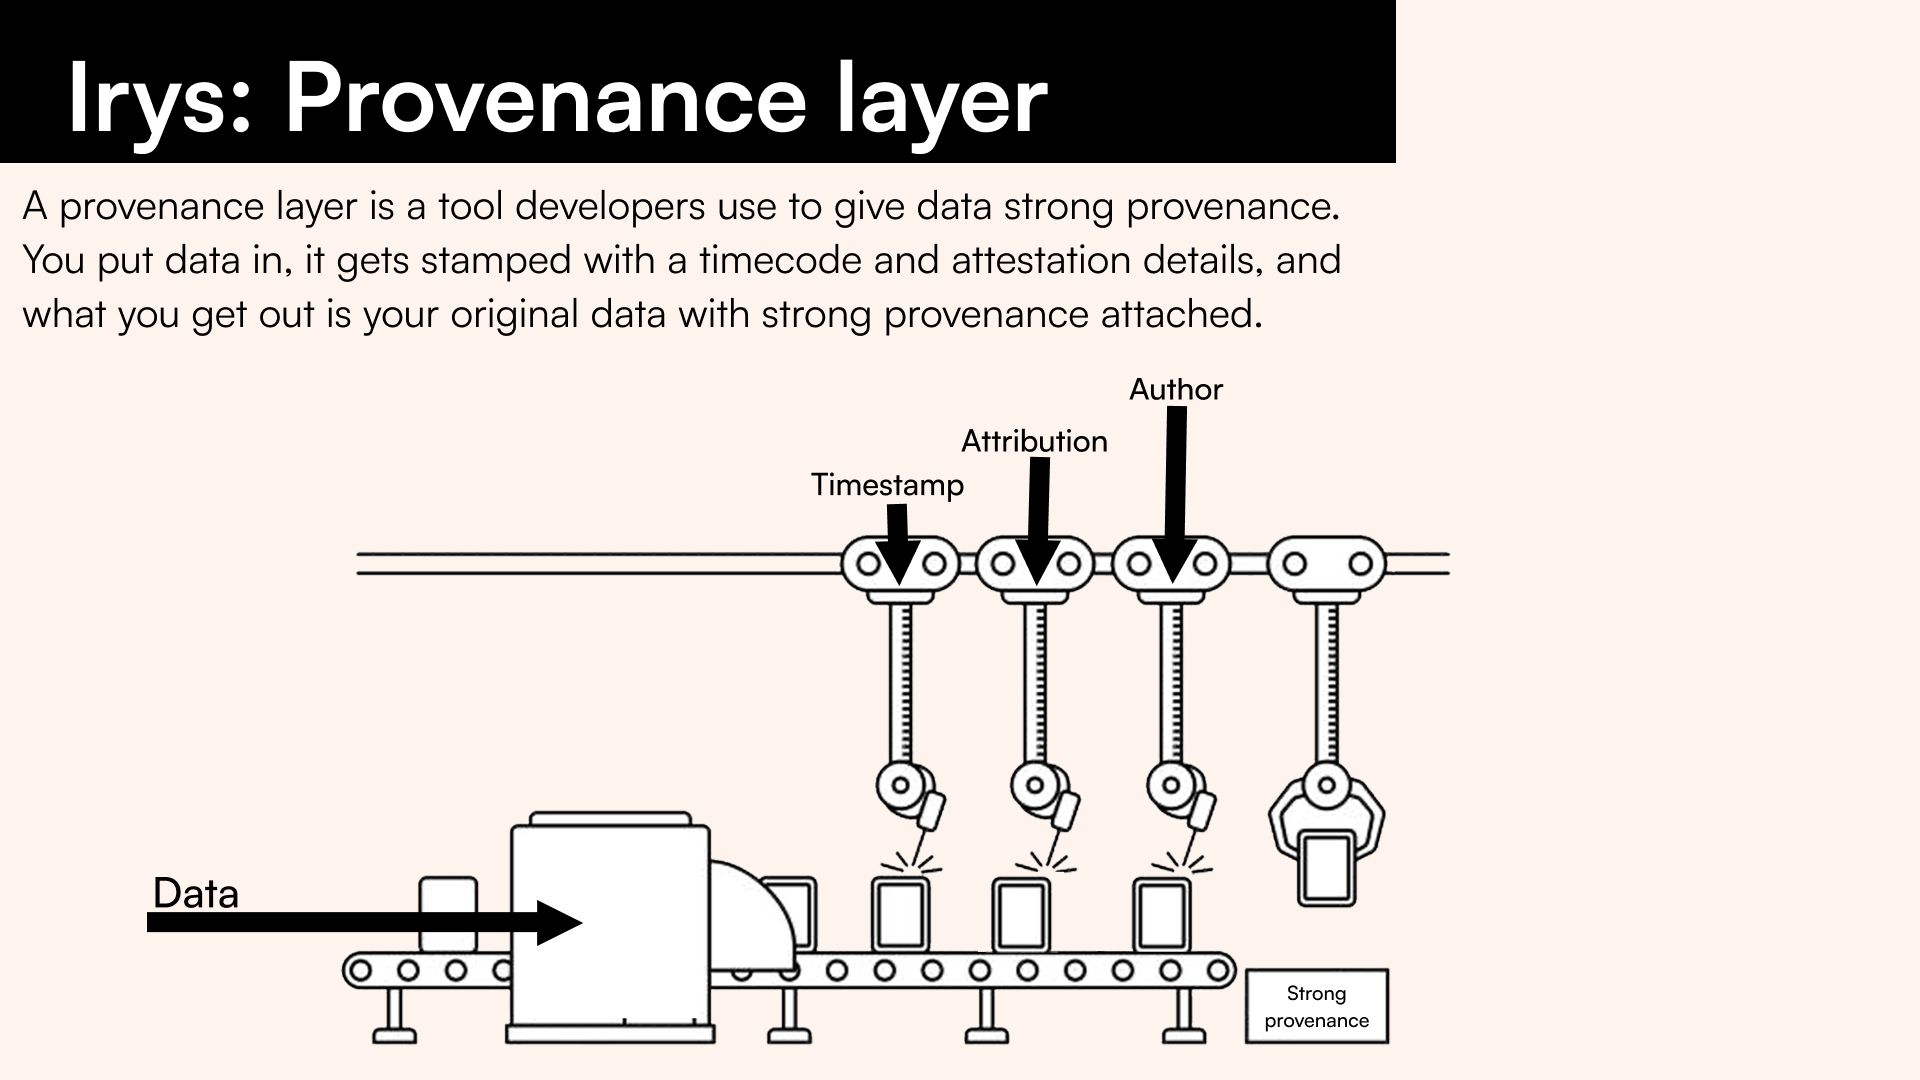 Irys is the only provenance layer